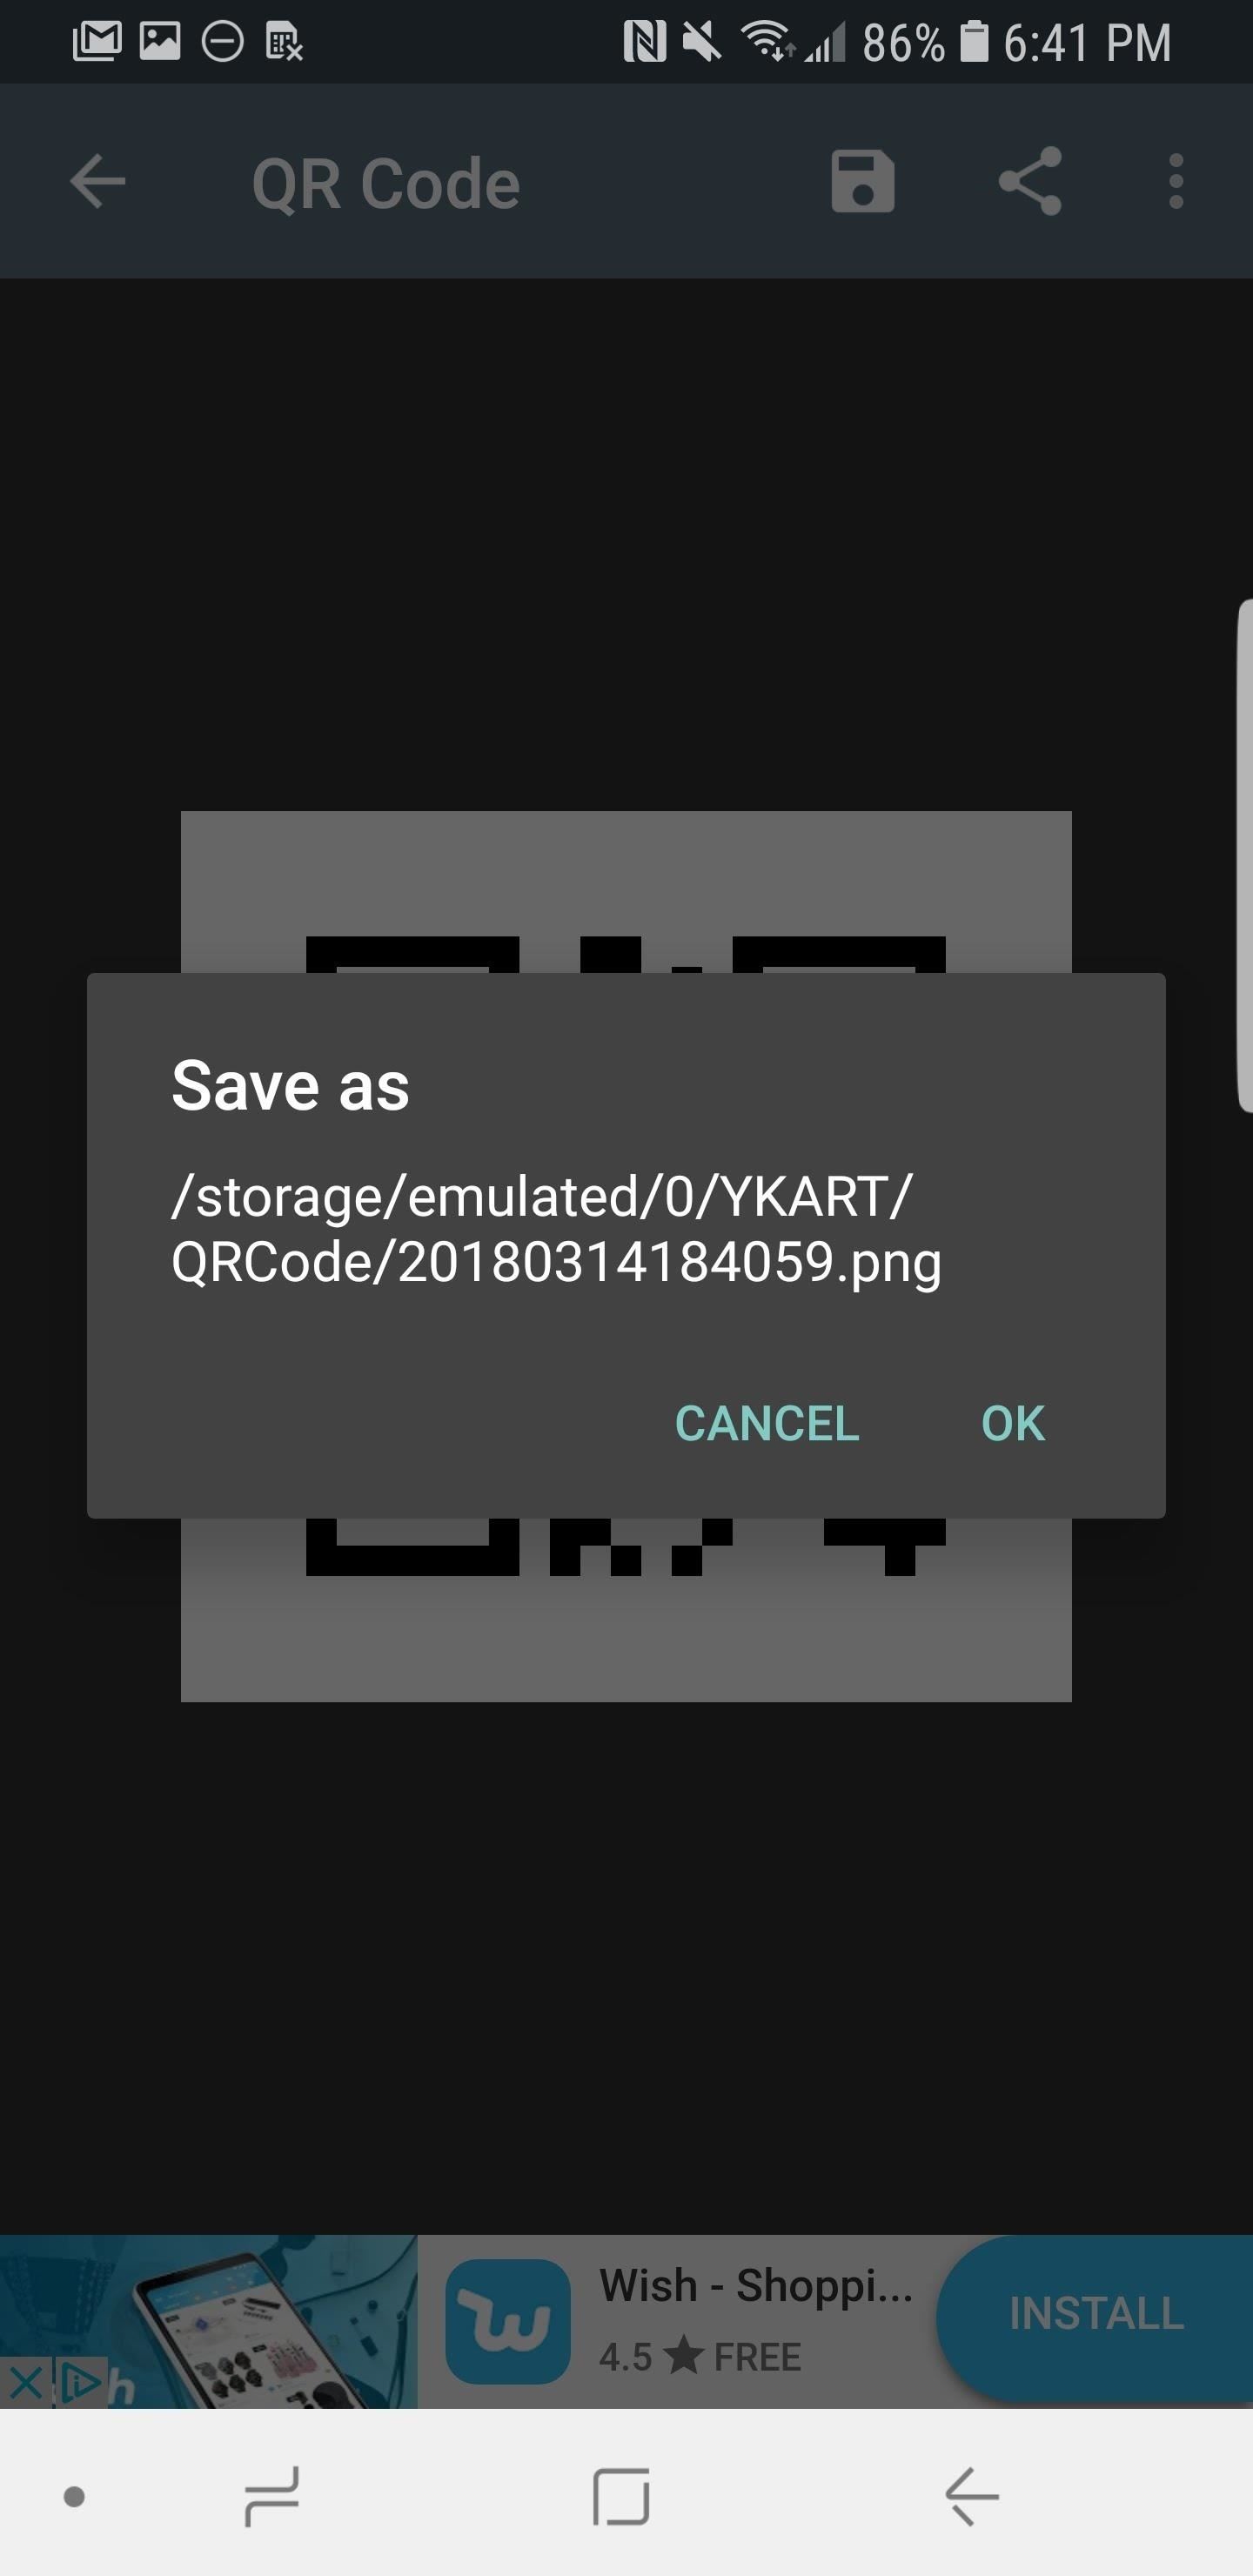 How to Easily Share Your Wi-Fi Password with a QR Code on Your Android Phone